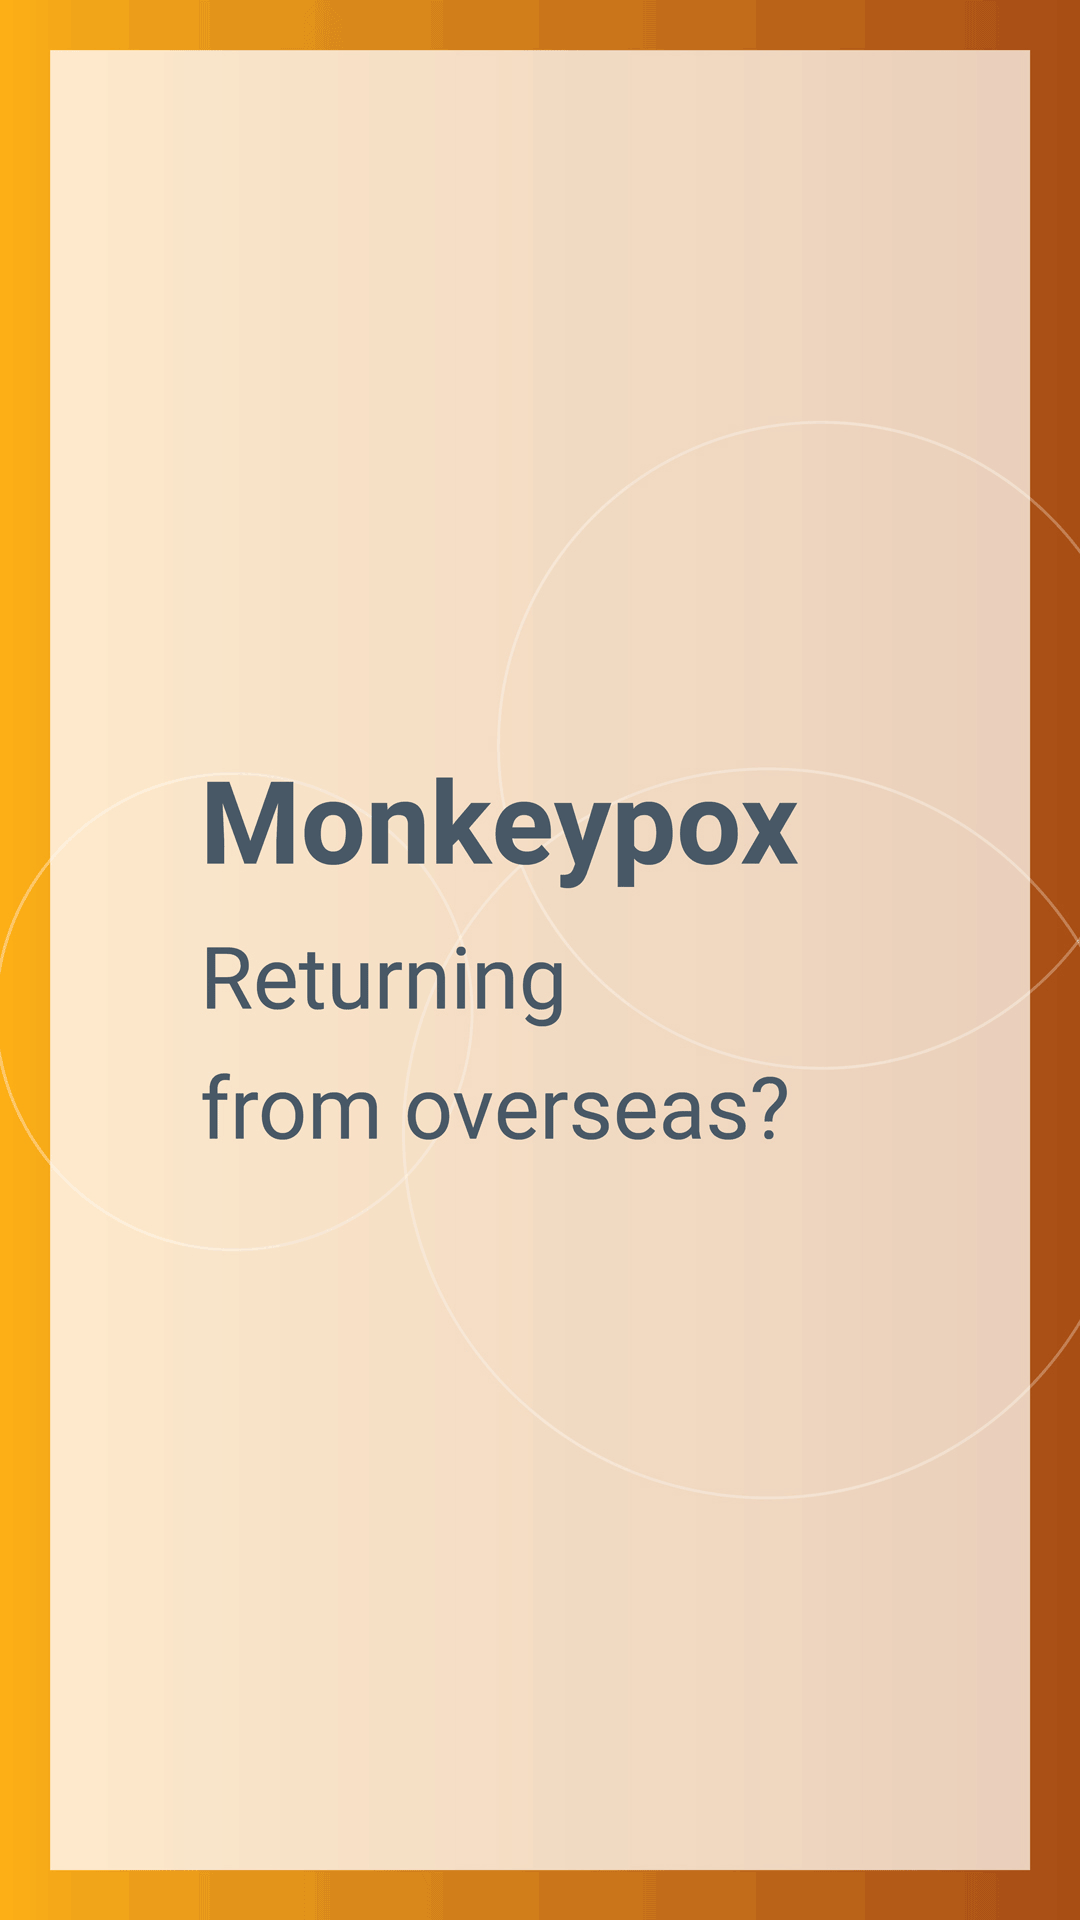 Monkeypox poster: Returning from overseas?